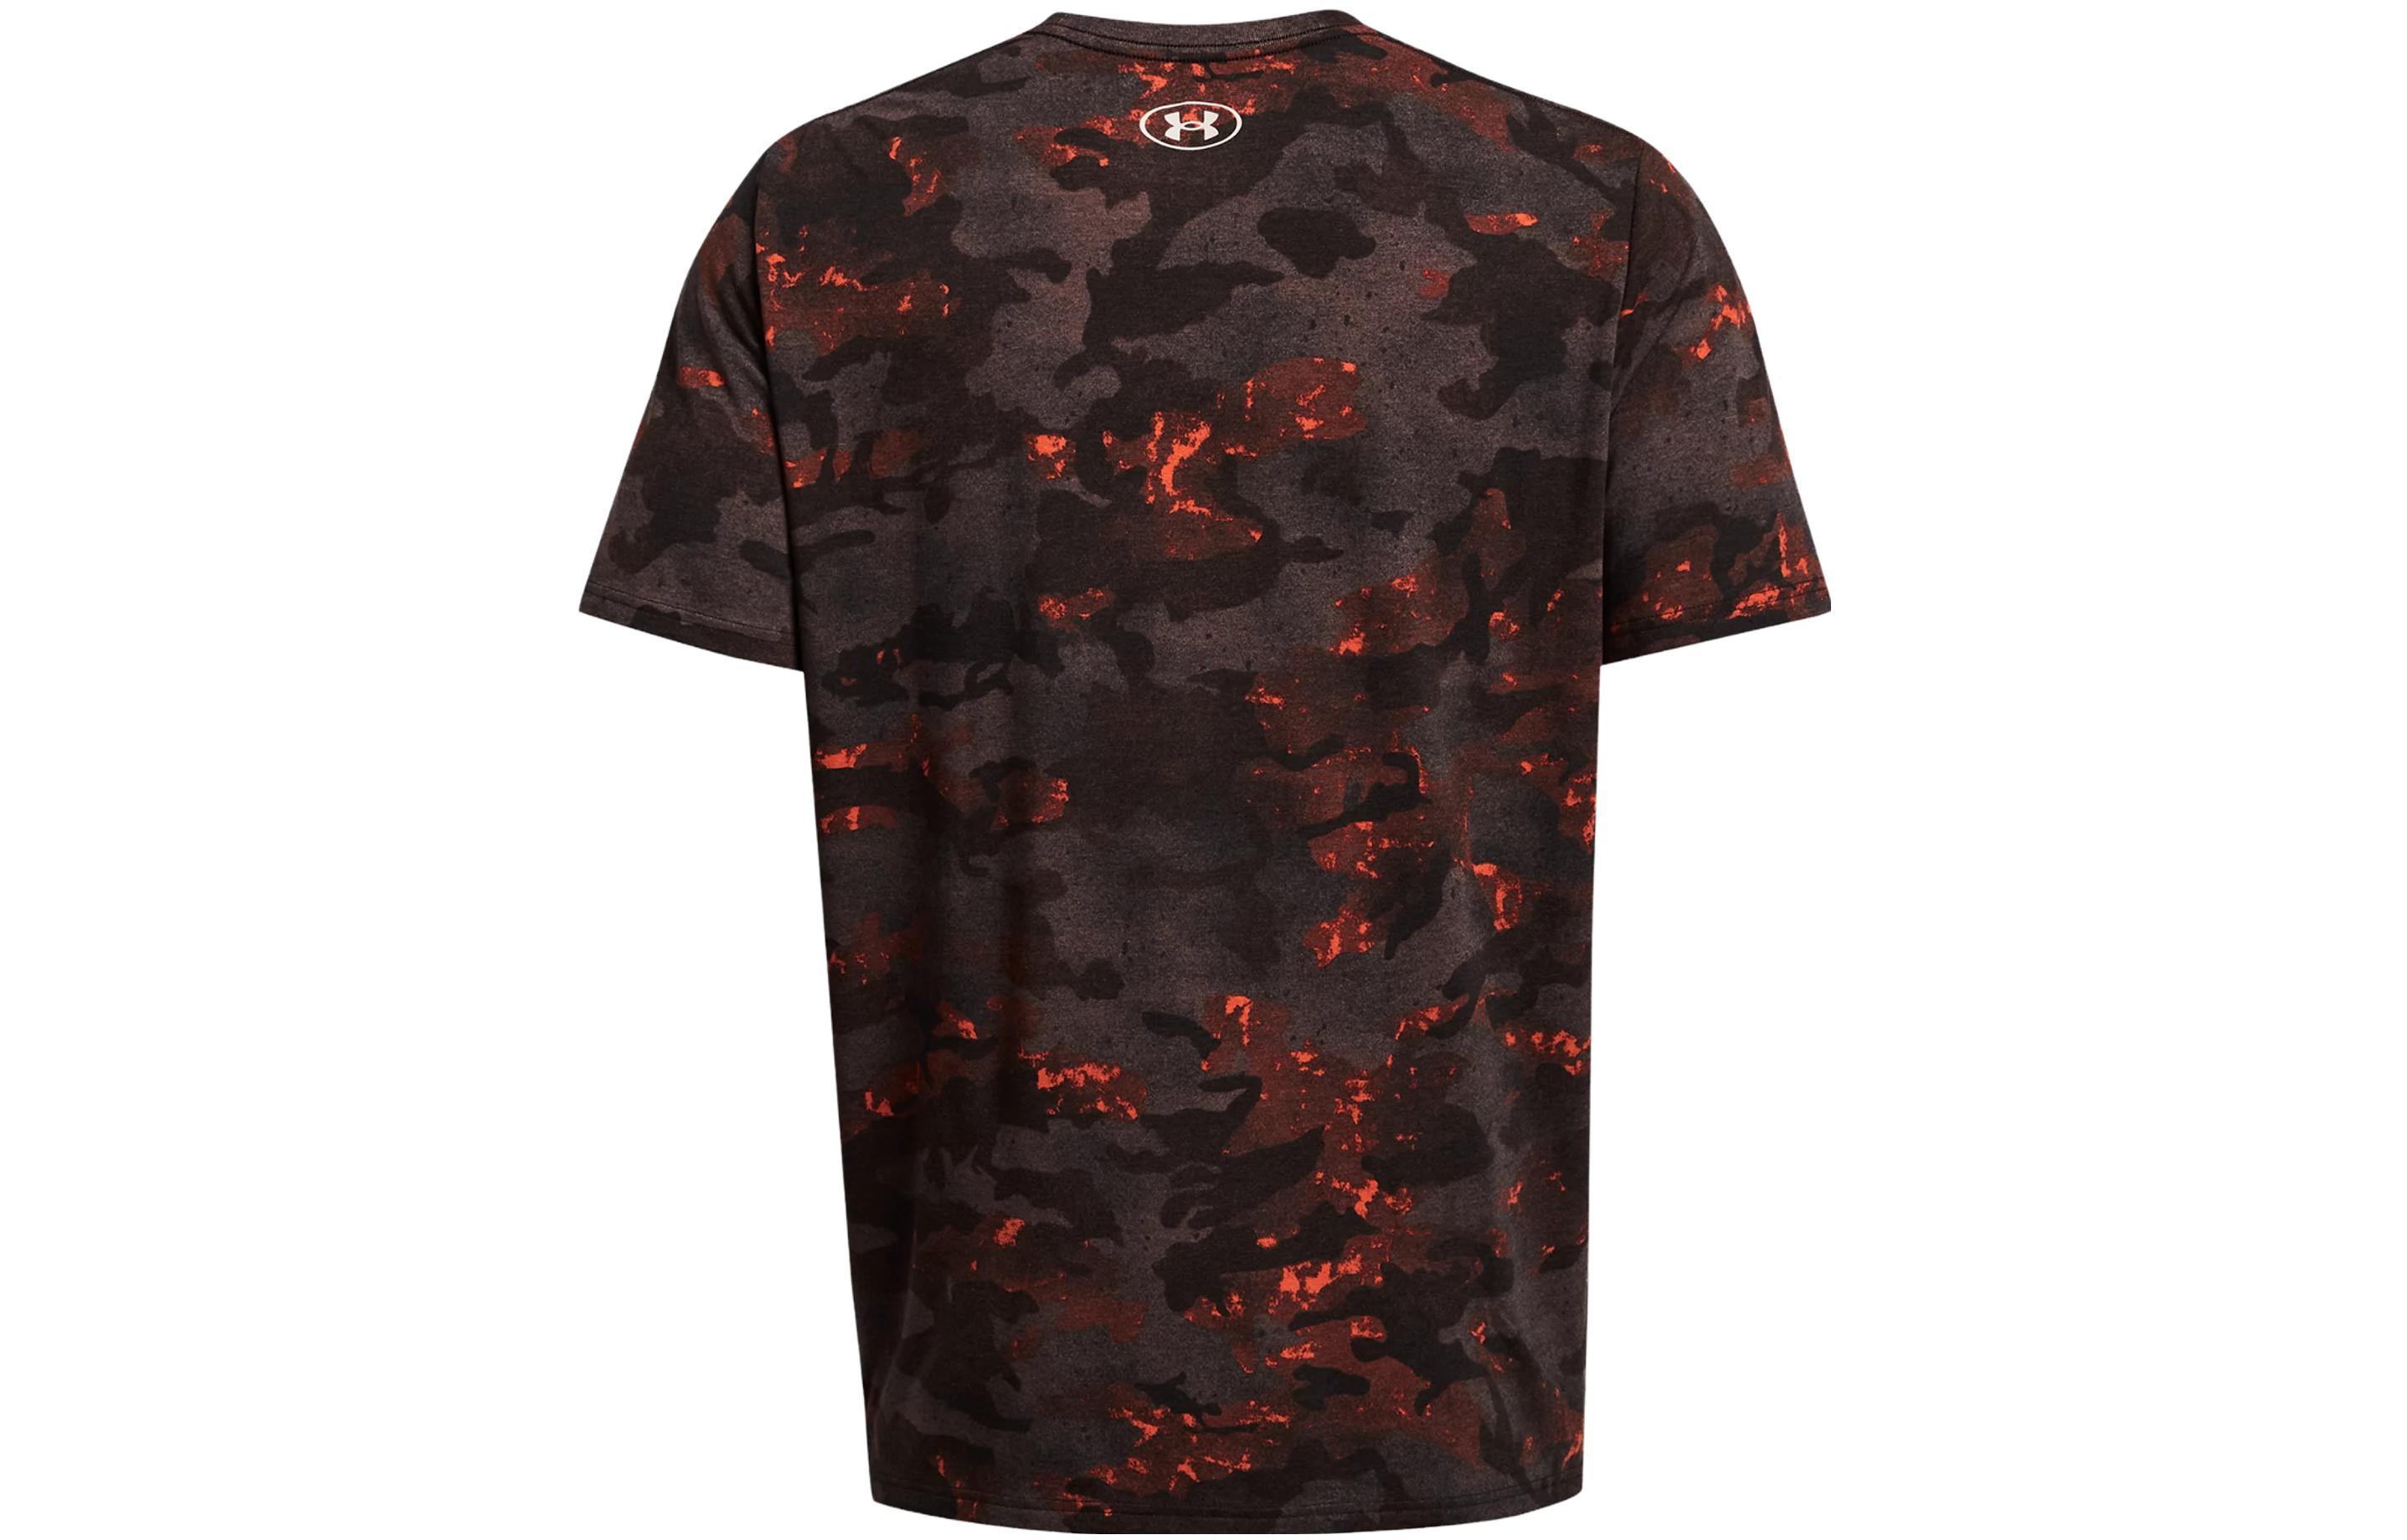 Under Armour Project Rock Veterans Day T